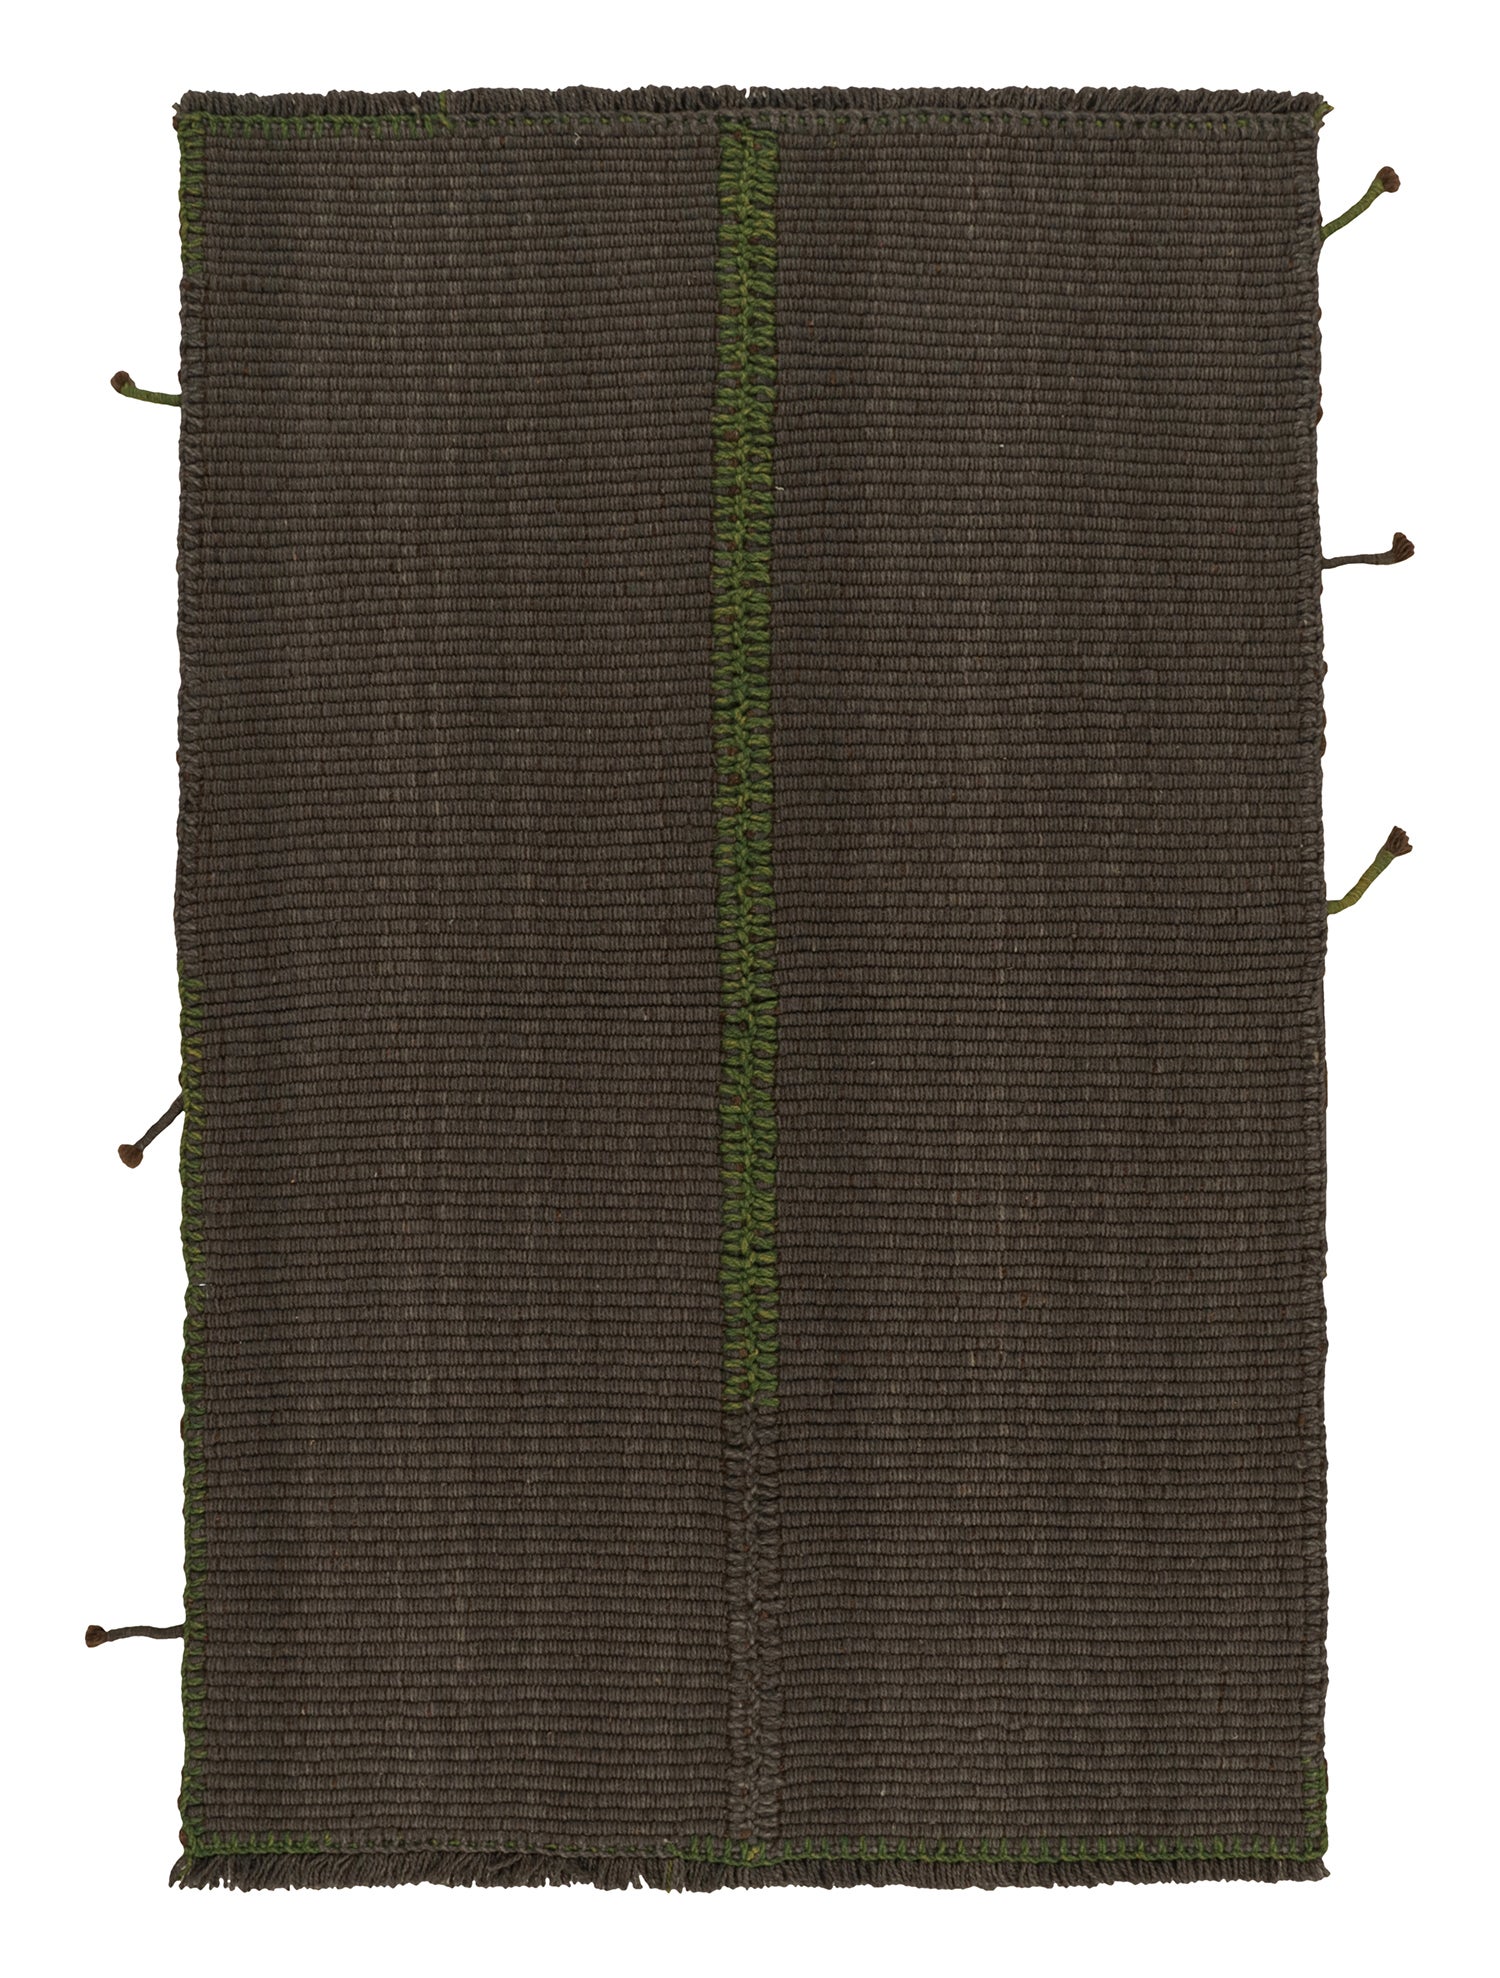 Rug & Kilim’s Contemporary Kilim in Brown with Green Accents For Sale